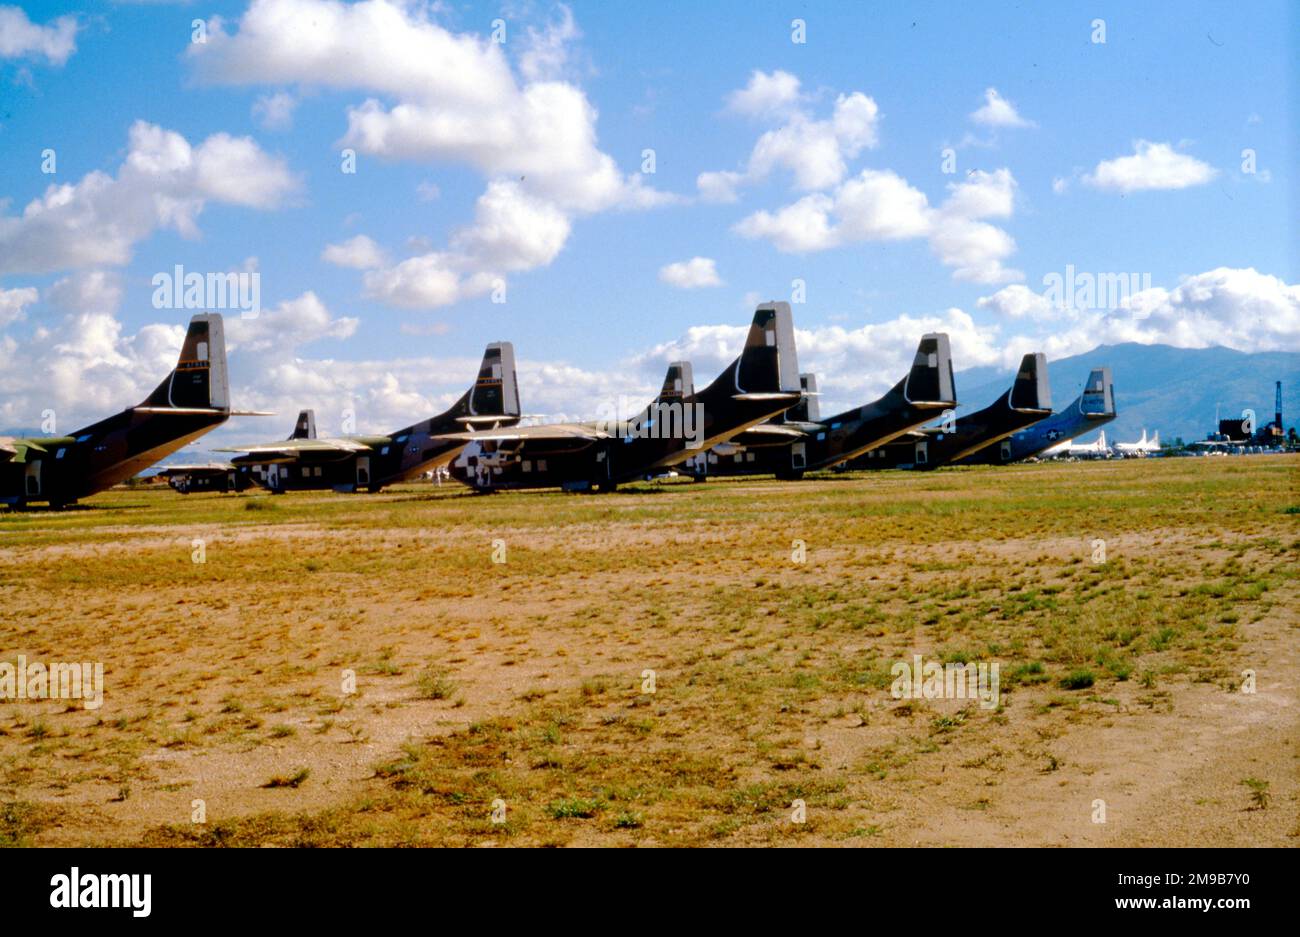 United States Air Force (USAF) - Fairchild C-123K Provider storage area at Davis-Monthan Air Force Base. Stock Photo